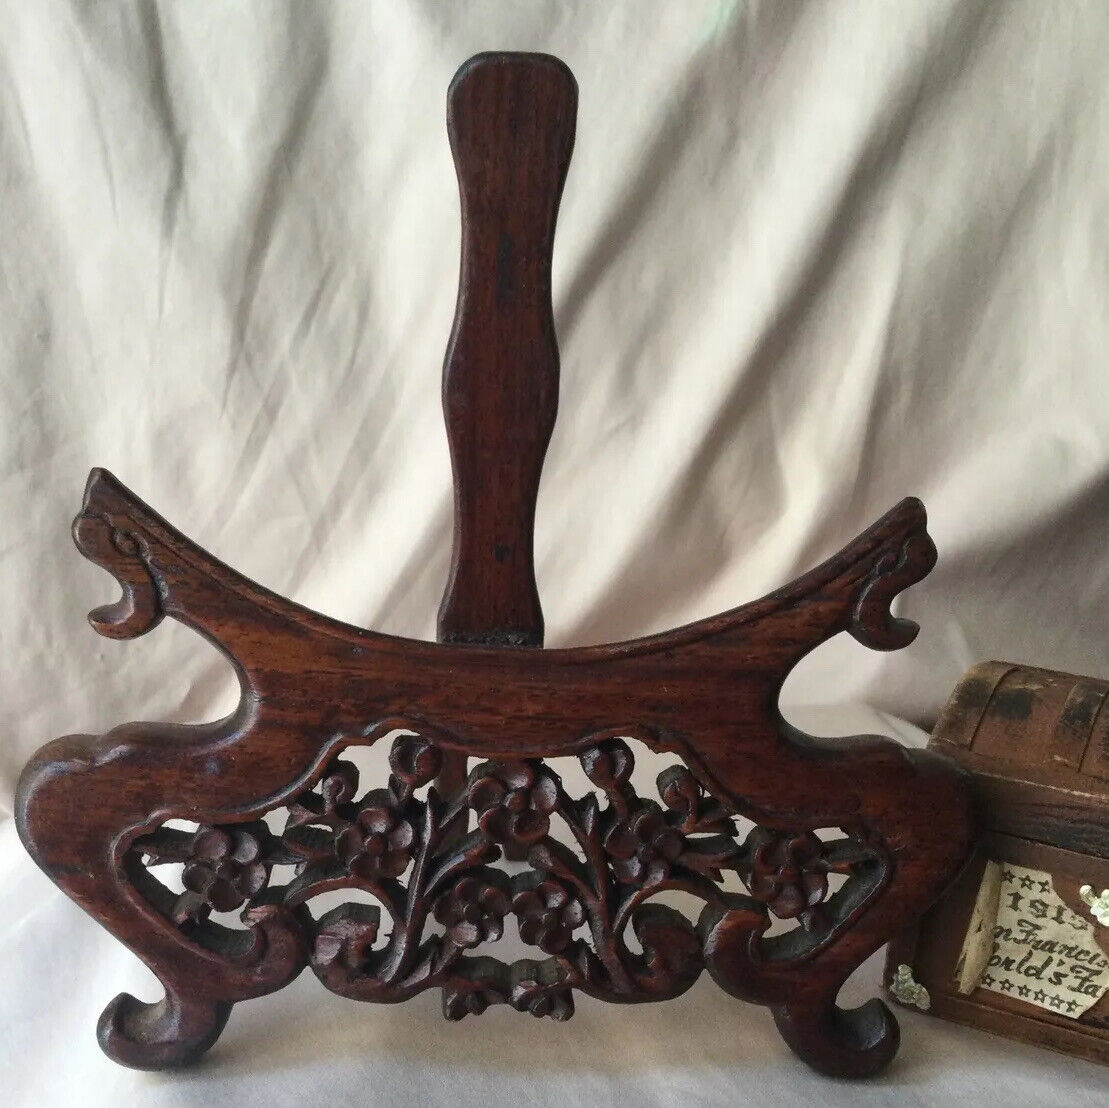 Antique Valuations: Old Chinese Sculpted Hardwood Wood Charger Plate Stand Rosewood Cherry Blossom